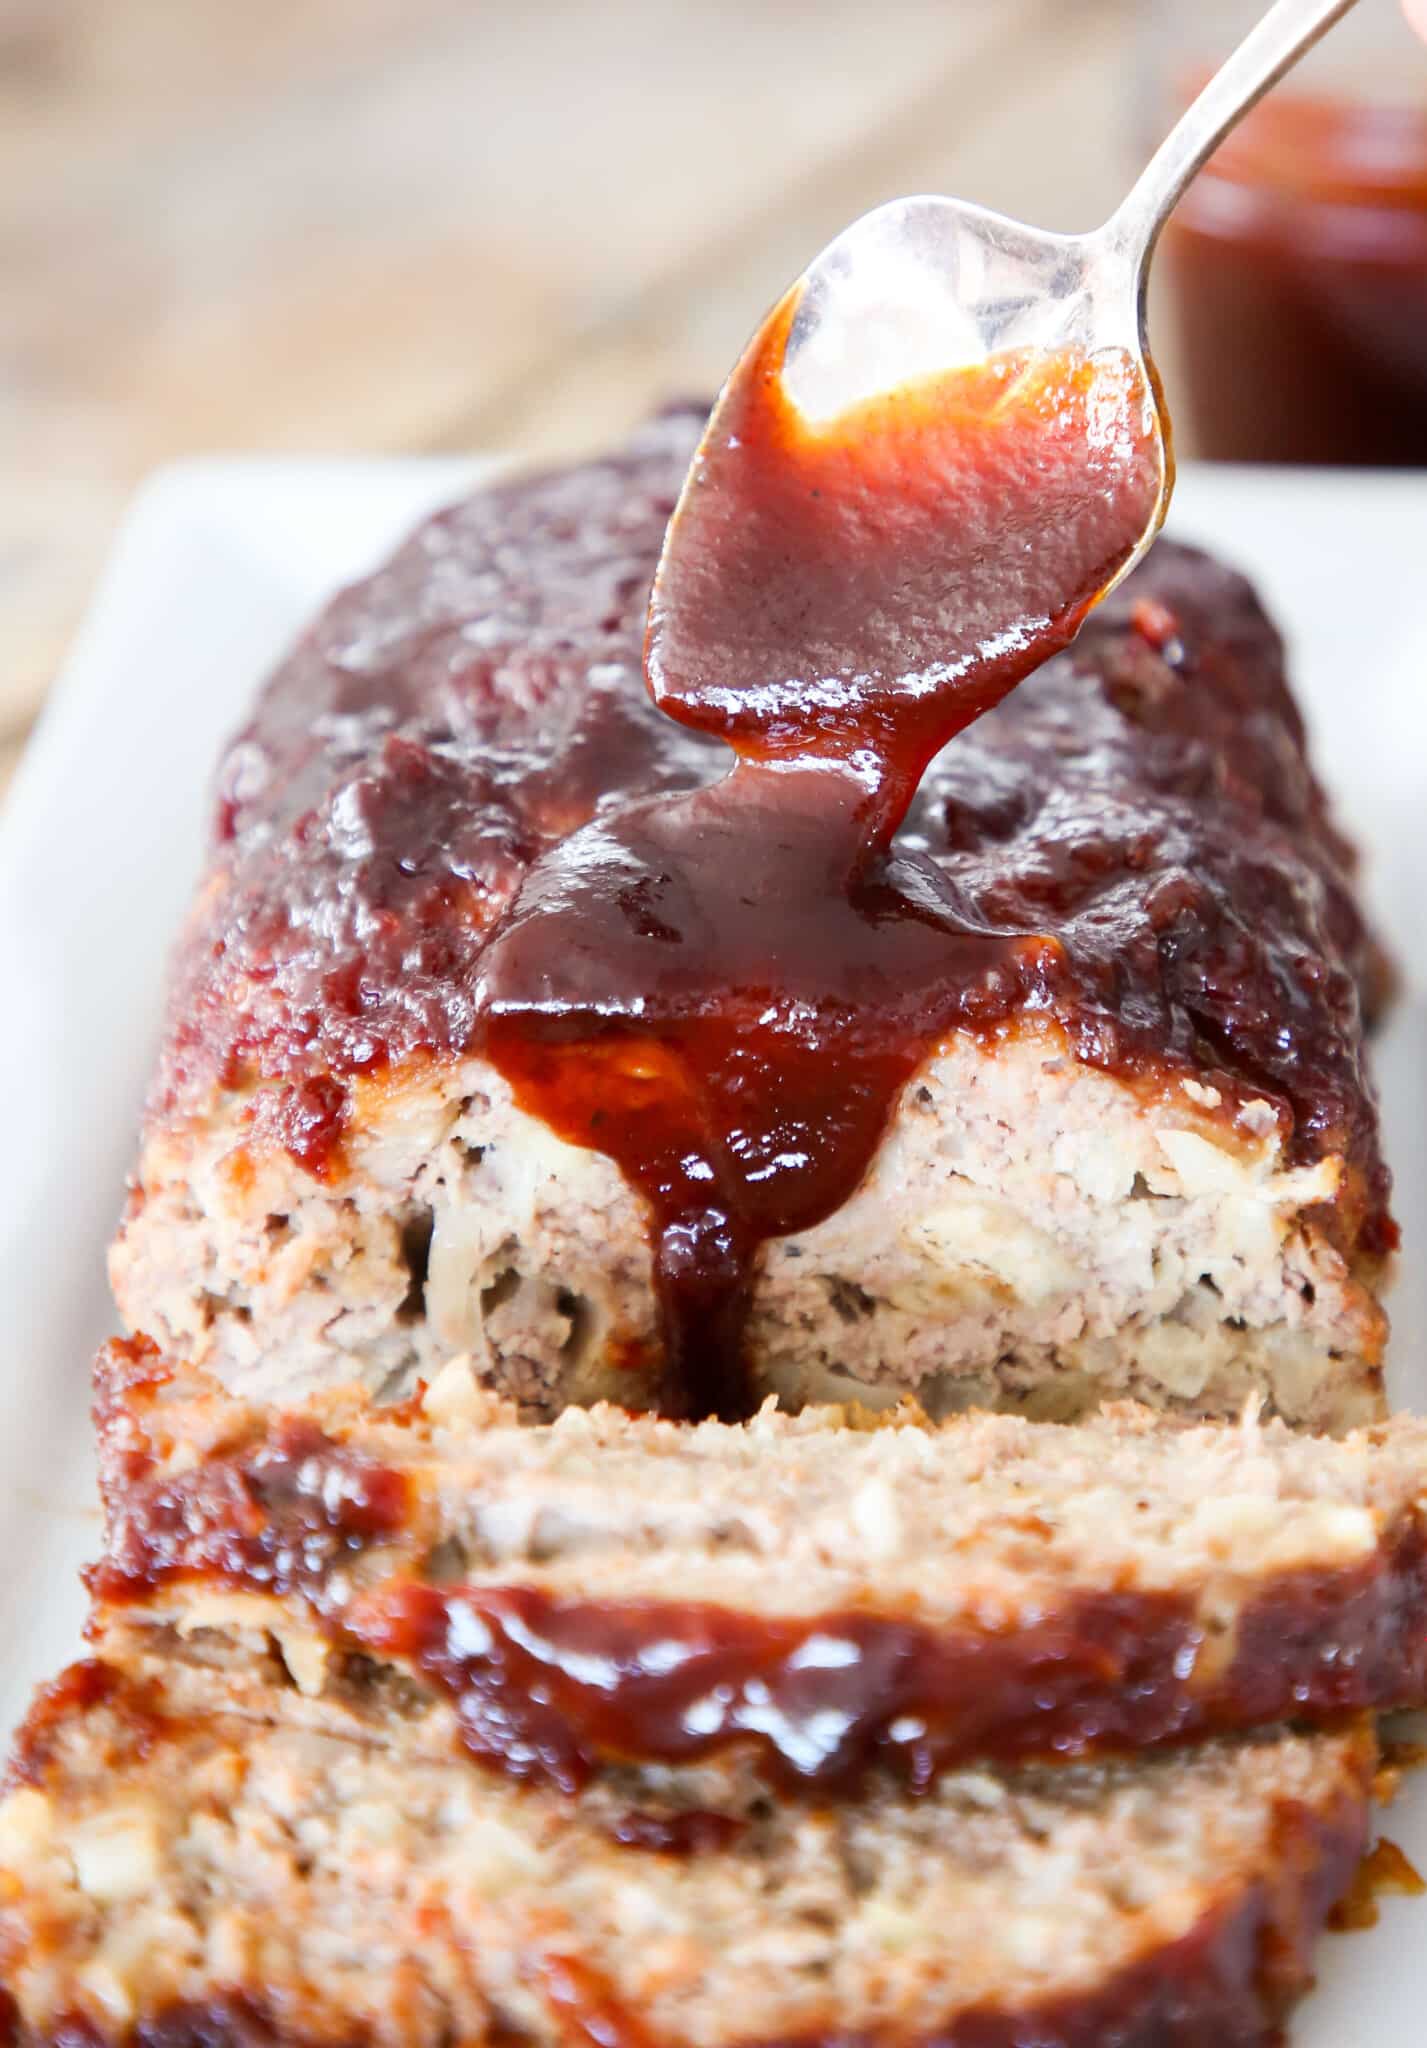 meatloaf with brown sugar sauce pouring over the top